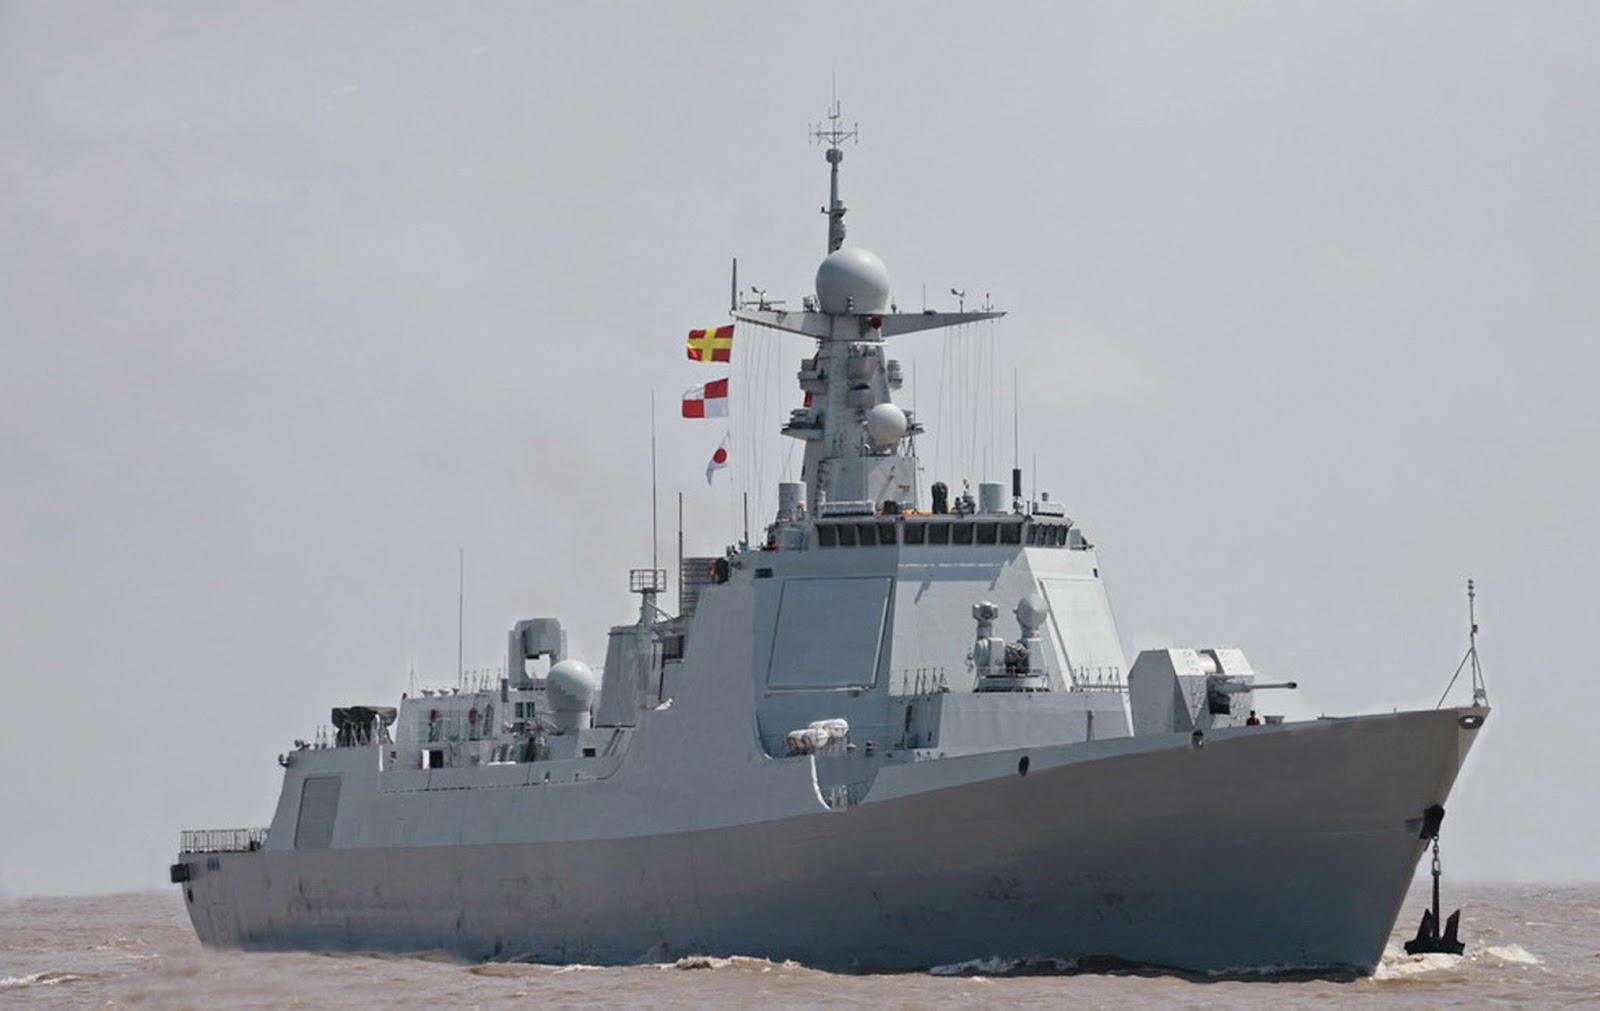 http://3.bp.blogspot.com/-Vx2MKZxX5c8/Uh_-BBI28VI/AAAAAAAAdME/OVtT5Cl4Vio/s1600/0Type+052D+Class+Guided+Missile+Destroyer+Starts+Its+First+Sea+Trial+export+pakistan+navy+pla+navy+chinese+missile+antiship+hq-10+hq-9+hq-16+sam+aesa++(2).jpg